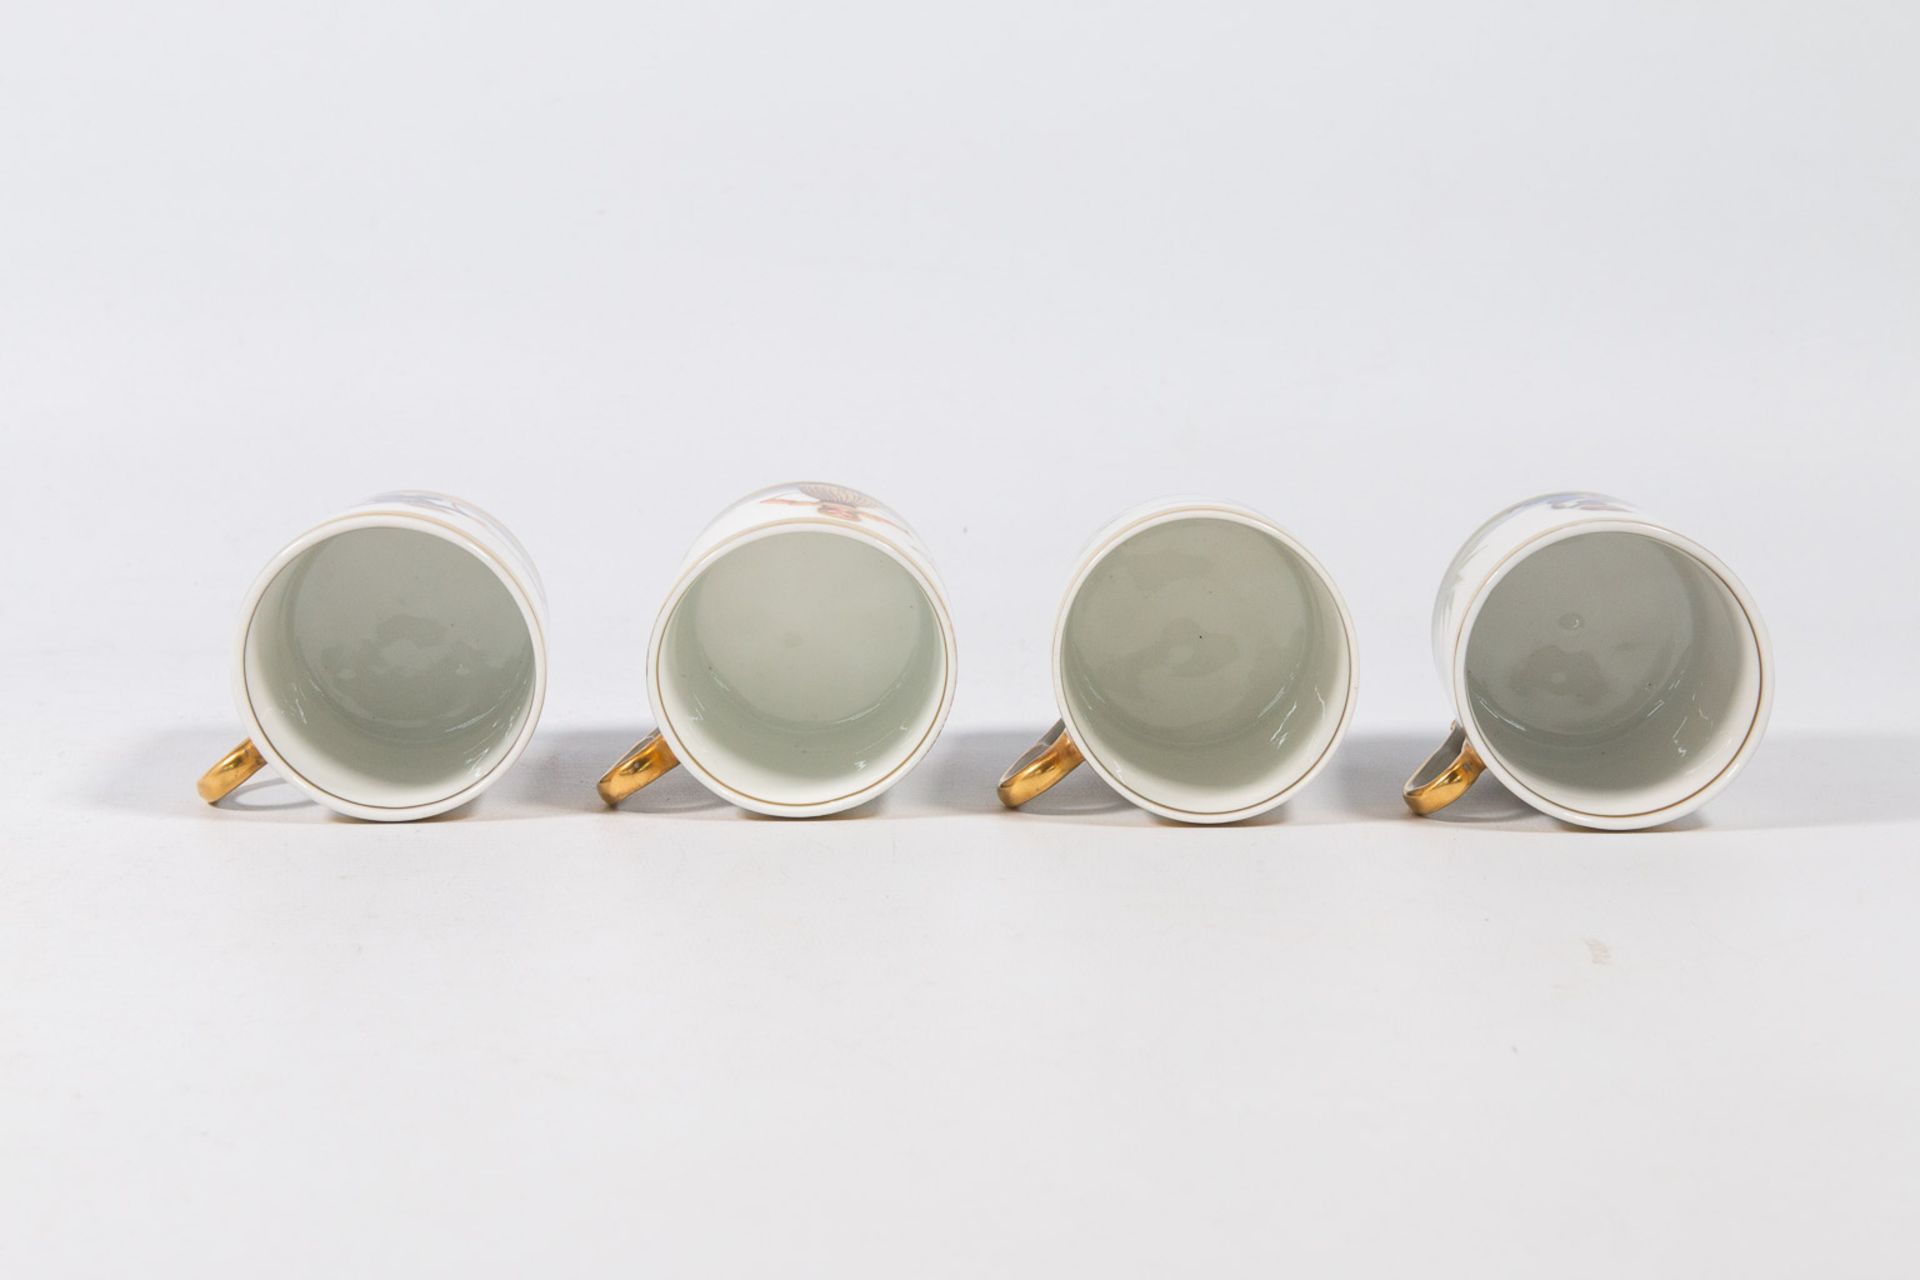 A Complete 'Vieux Bruxelles' coffee and tea service made of porcelain. - Image 7 of 53